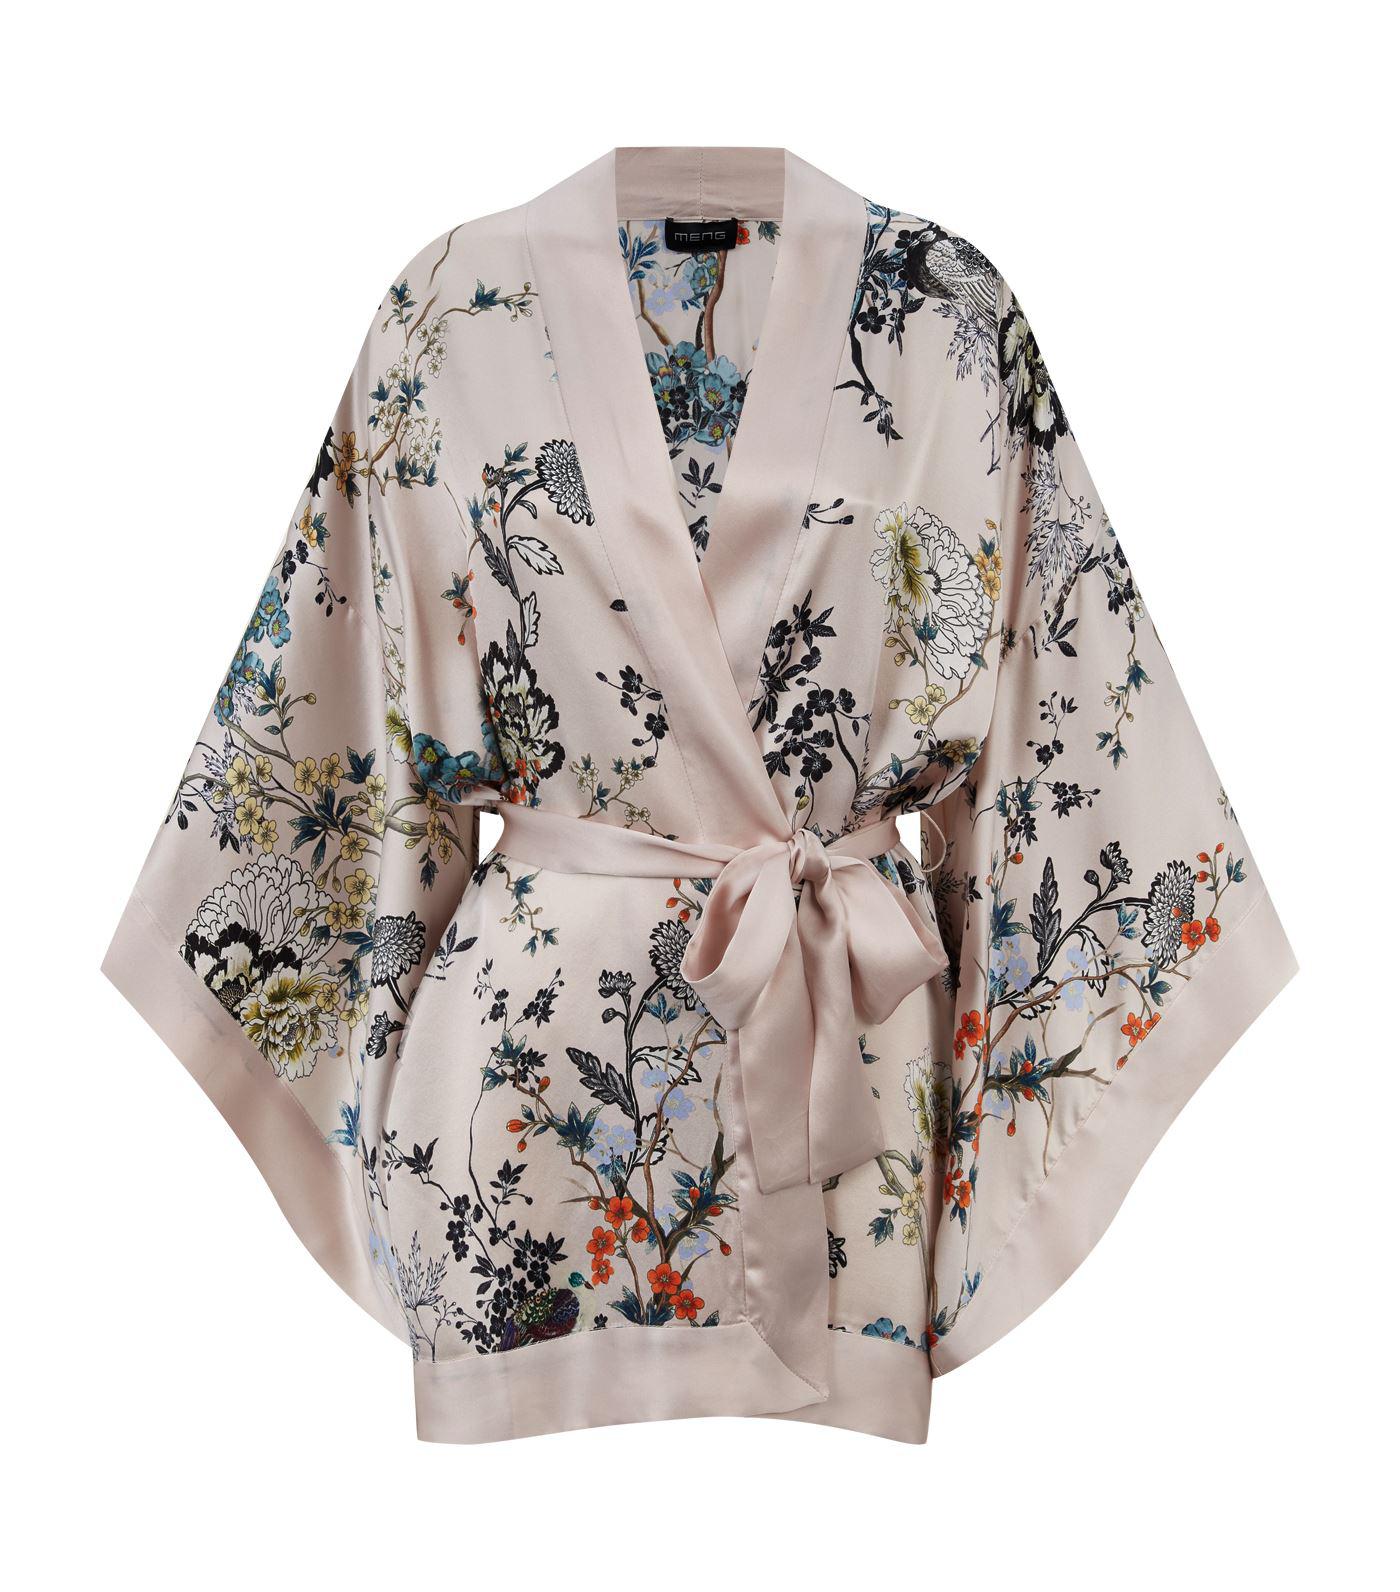 Meng Silk Floral Kimono Robe in Pink - Lyst